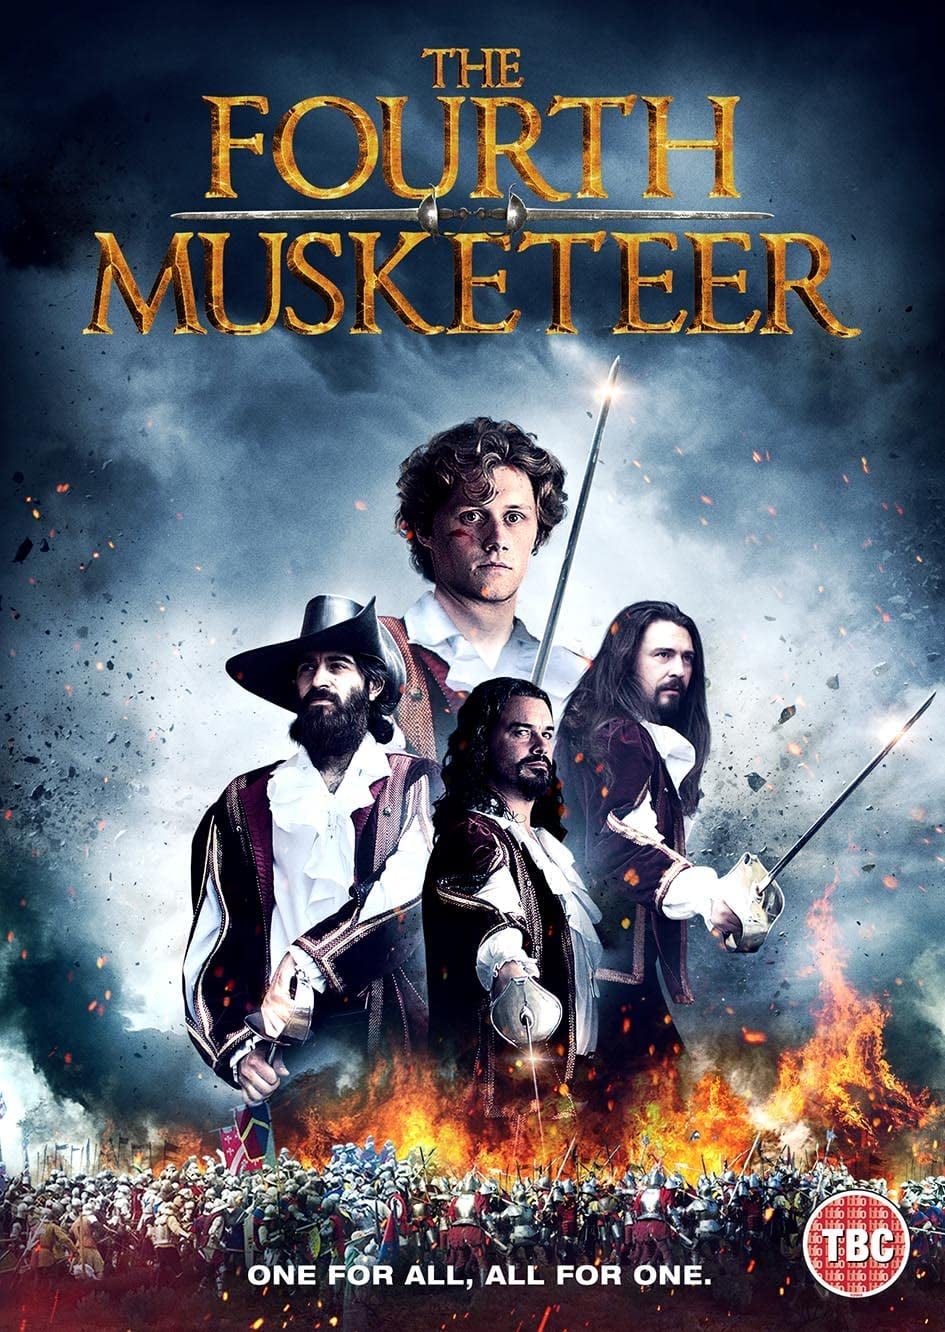 The Fourth Musketeer 2022 English 1080p 720p 480p HDRip